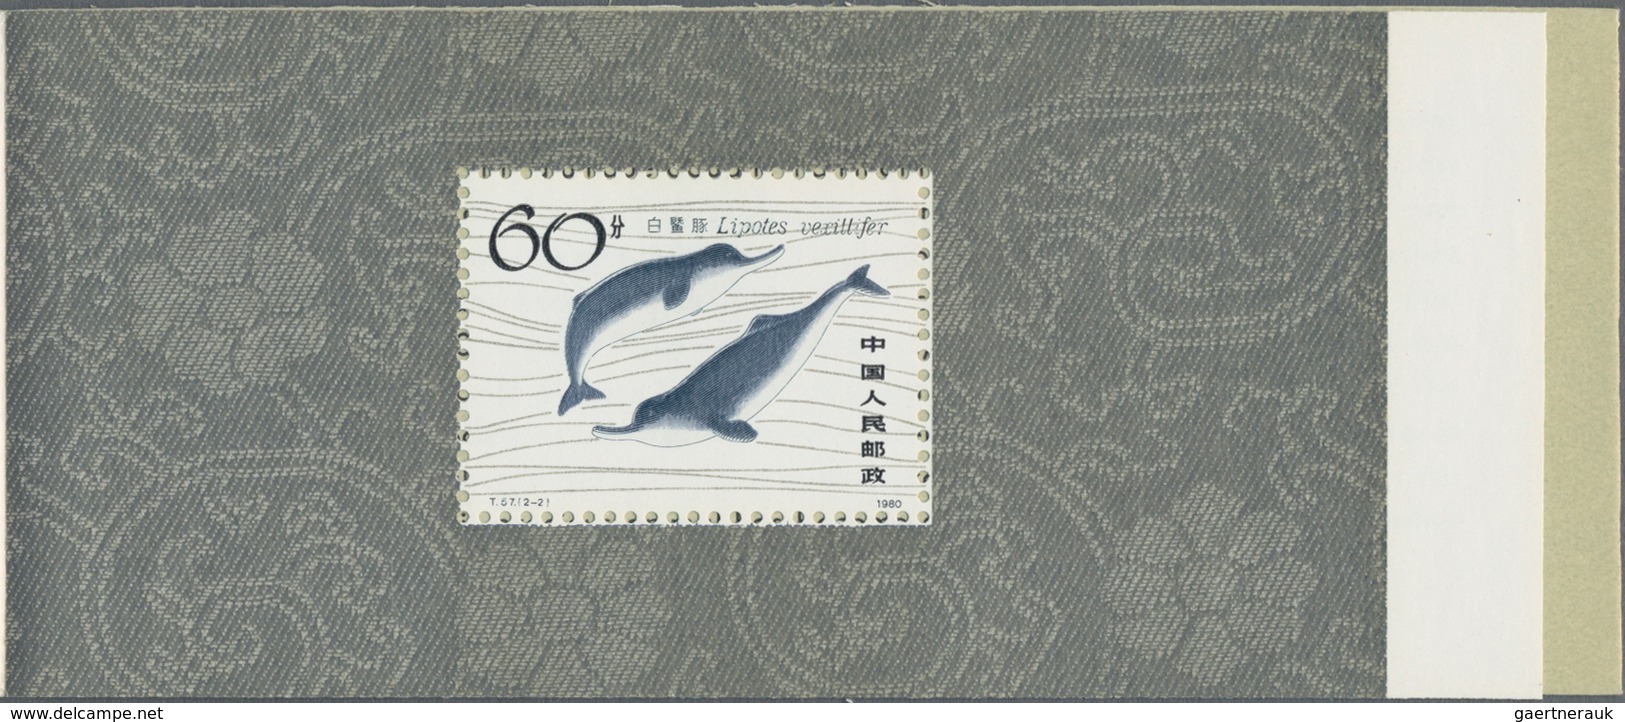 China - Volksrepublik: 1981, 4 SB2 Chinese River Dolphins booklet panes (Michel €440).